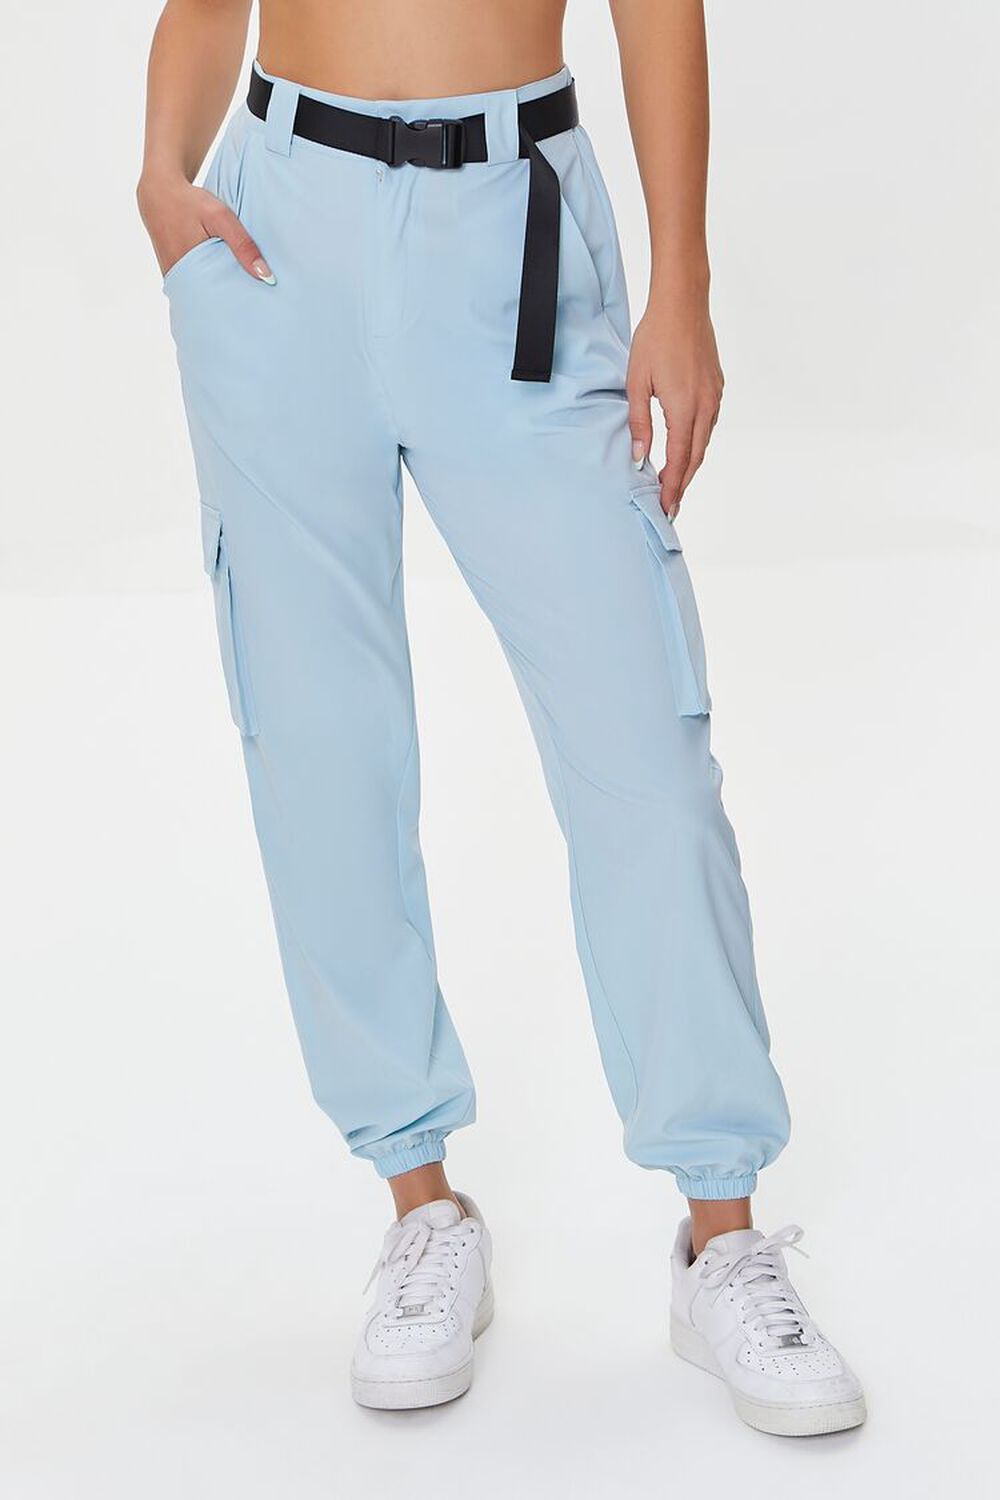 LIGHT BLUE Active Release-Buckle Belted Joggers, image 2